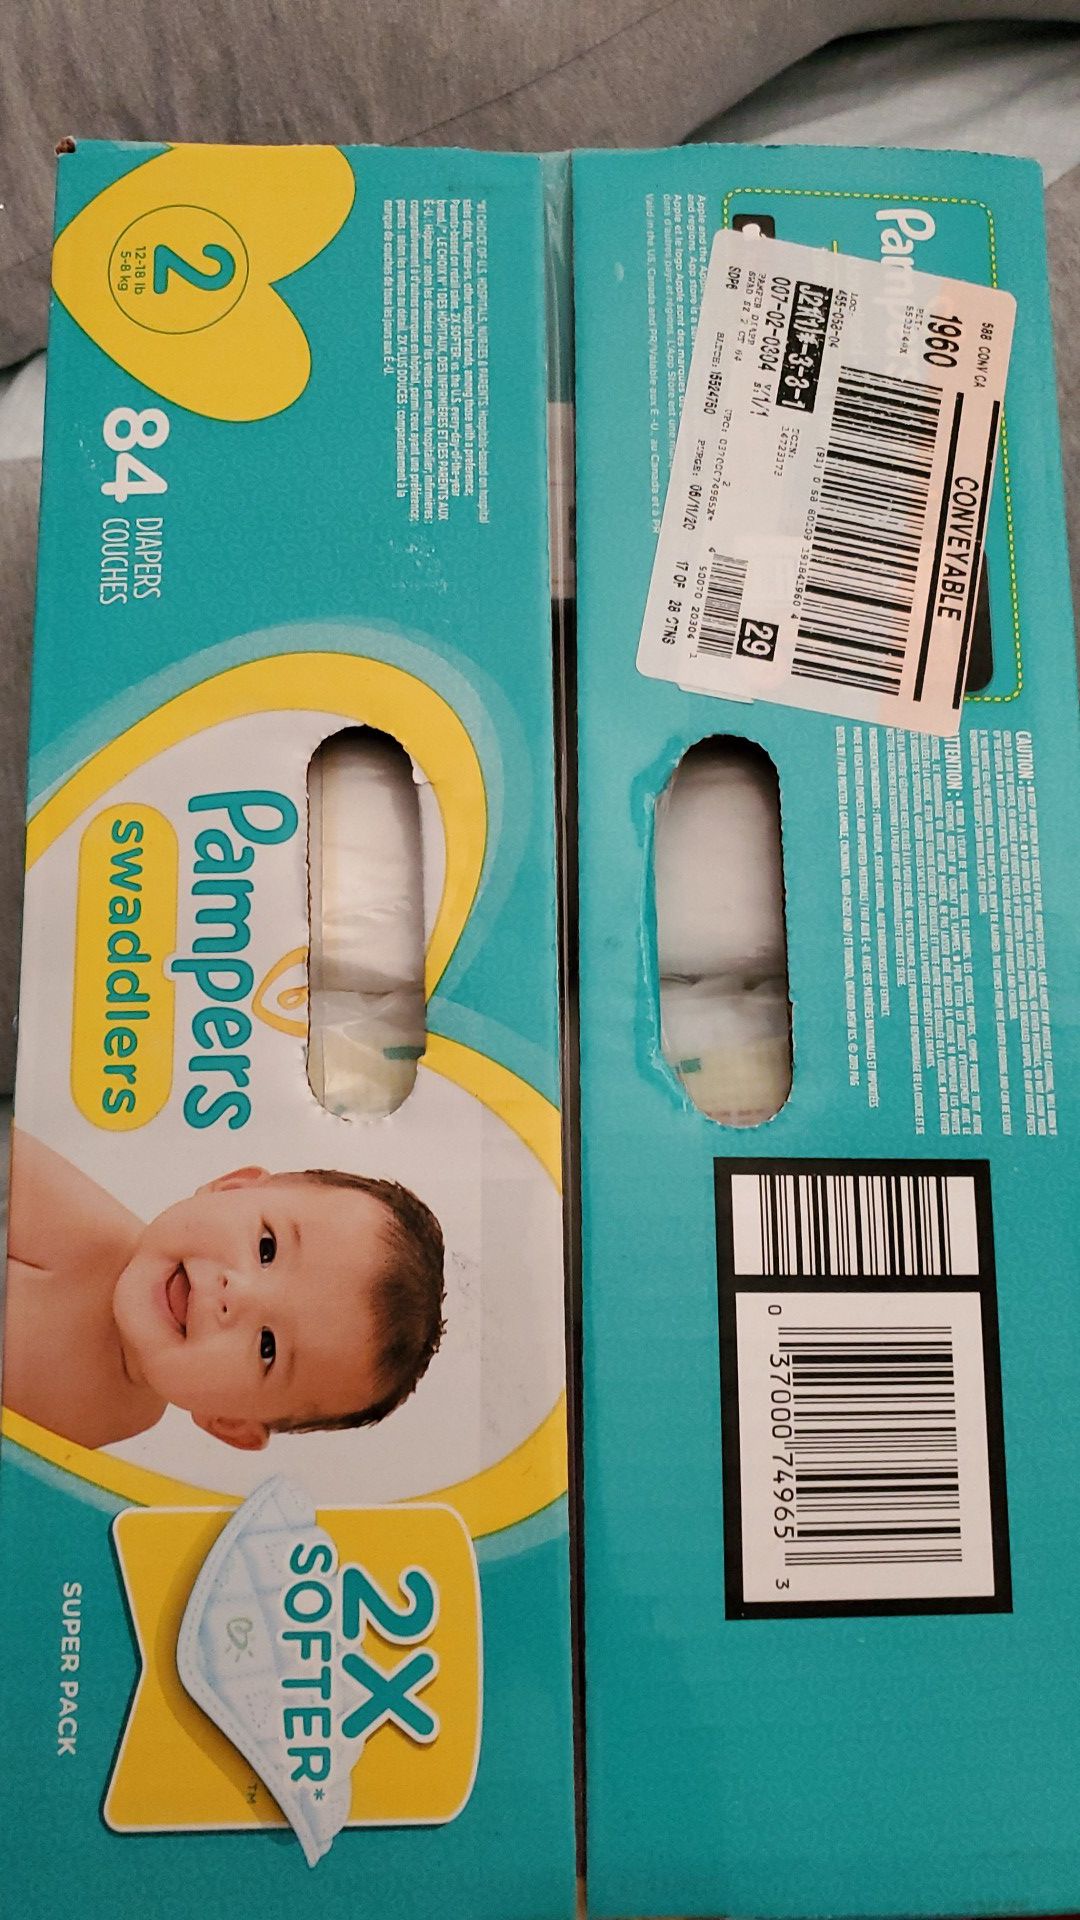 Size 2 pampers